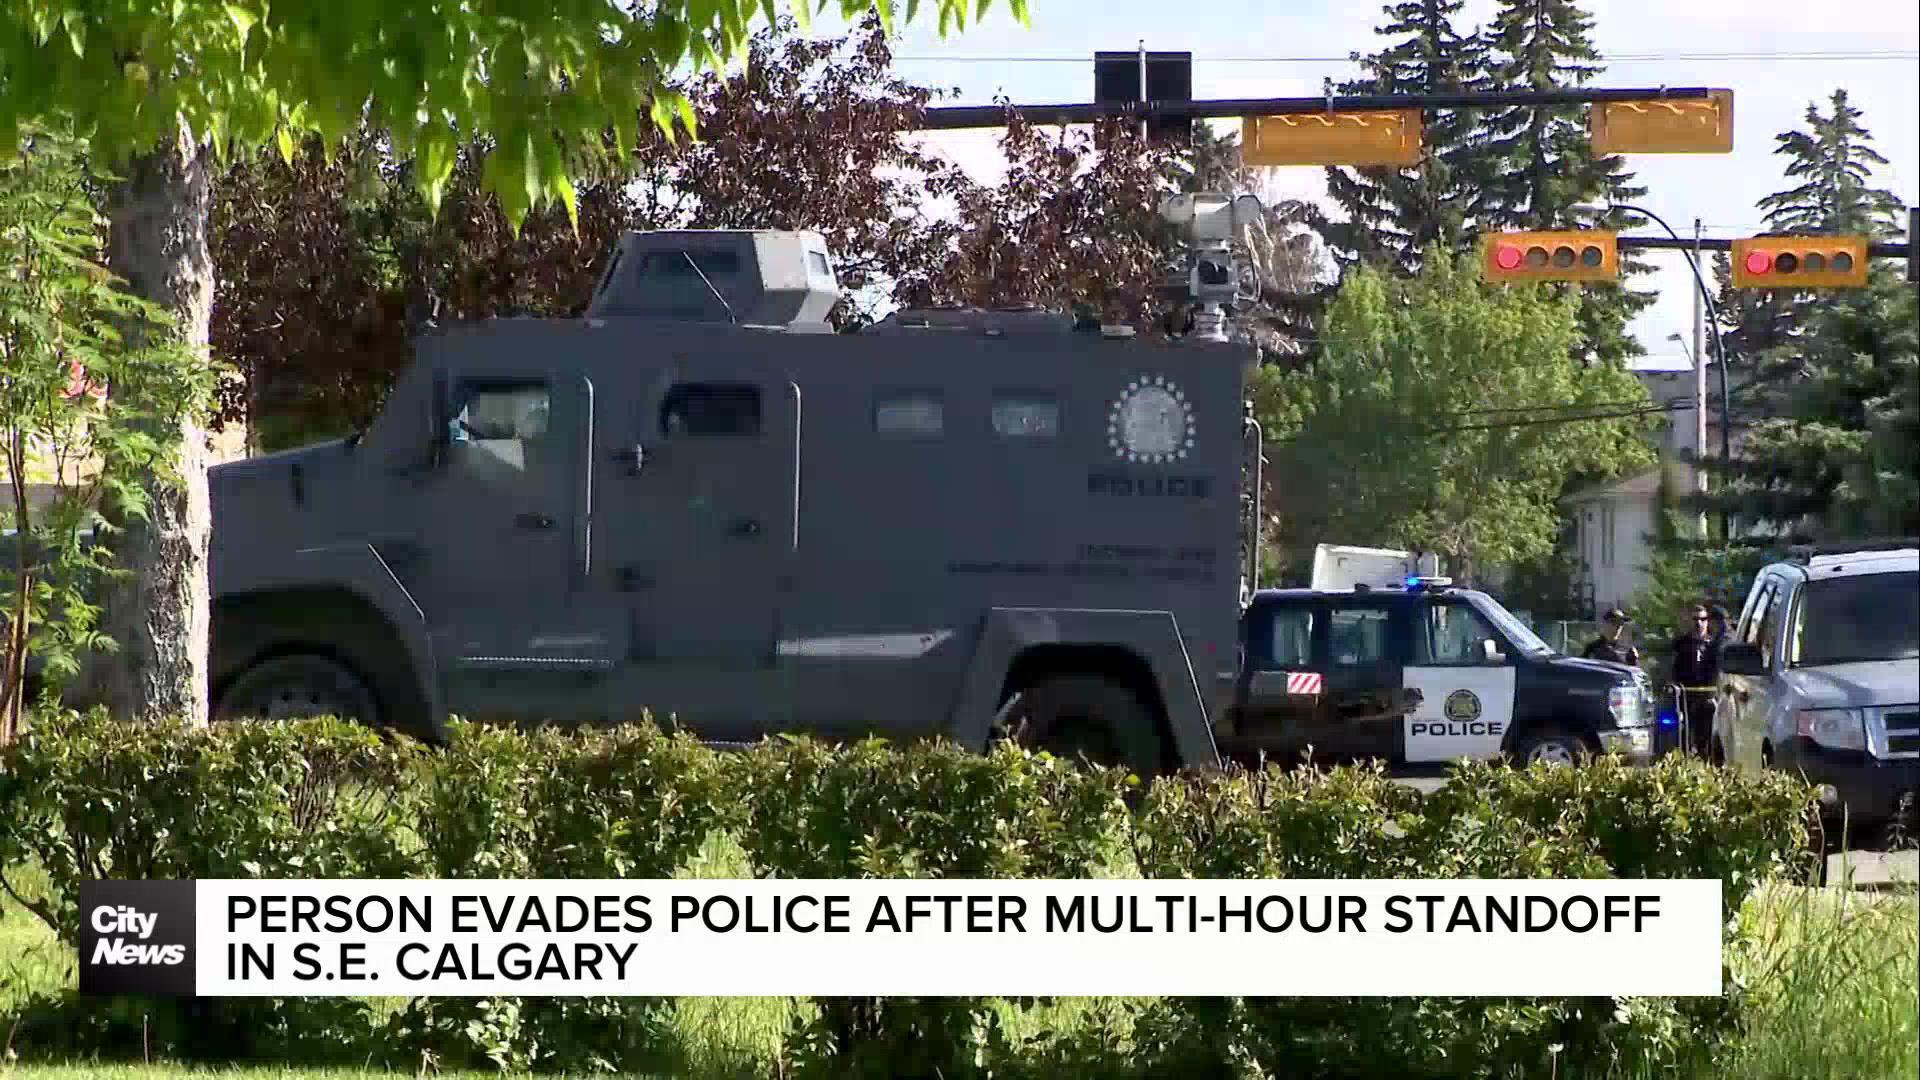 Person evades police after multi-hour standoff in Calgary